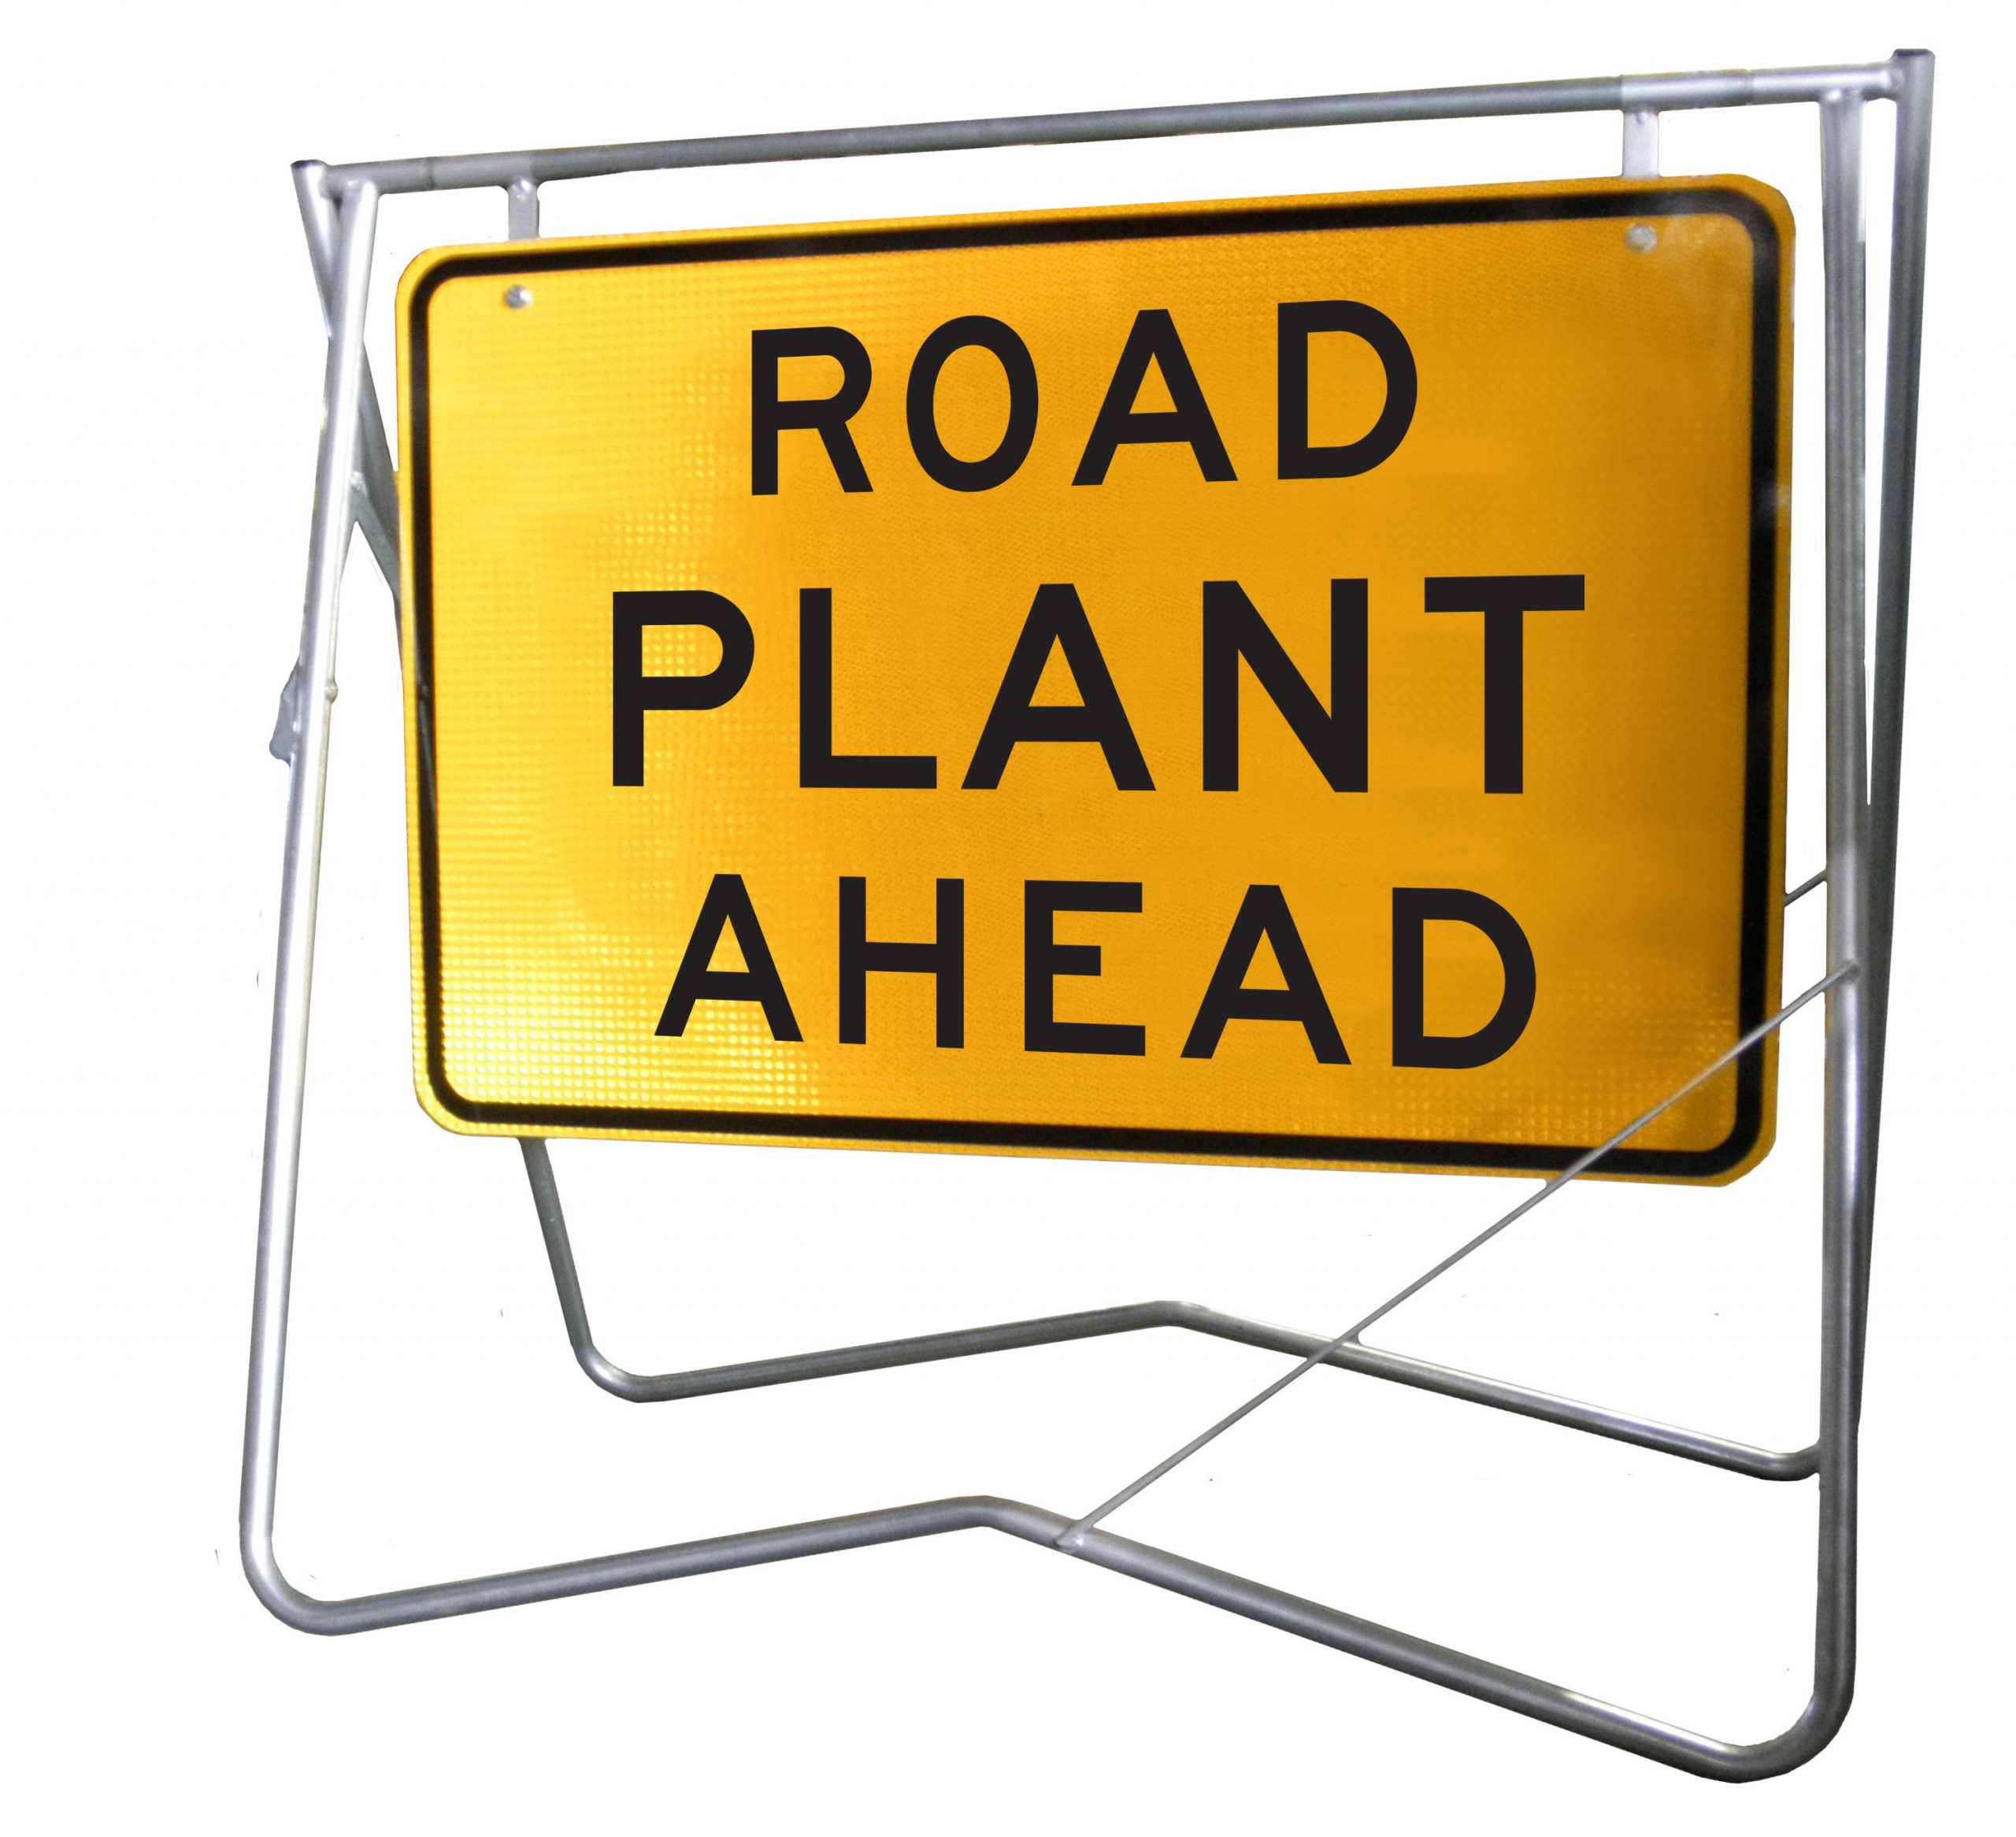 Road Plant Ahead - 900x600 - Mounted on Swing Stand